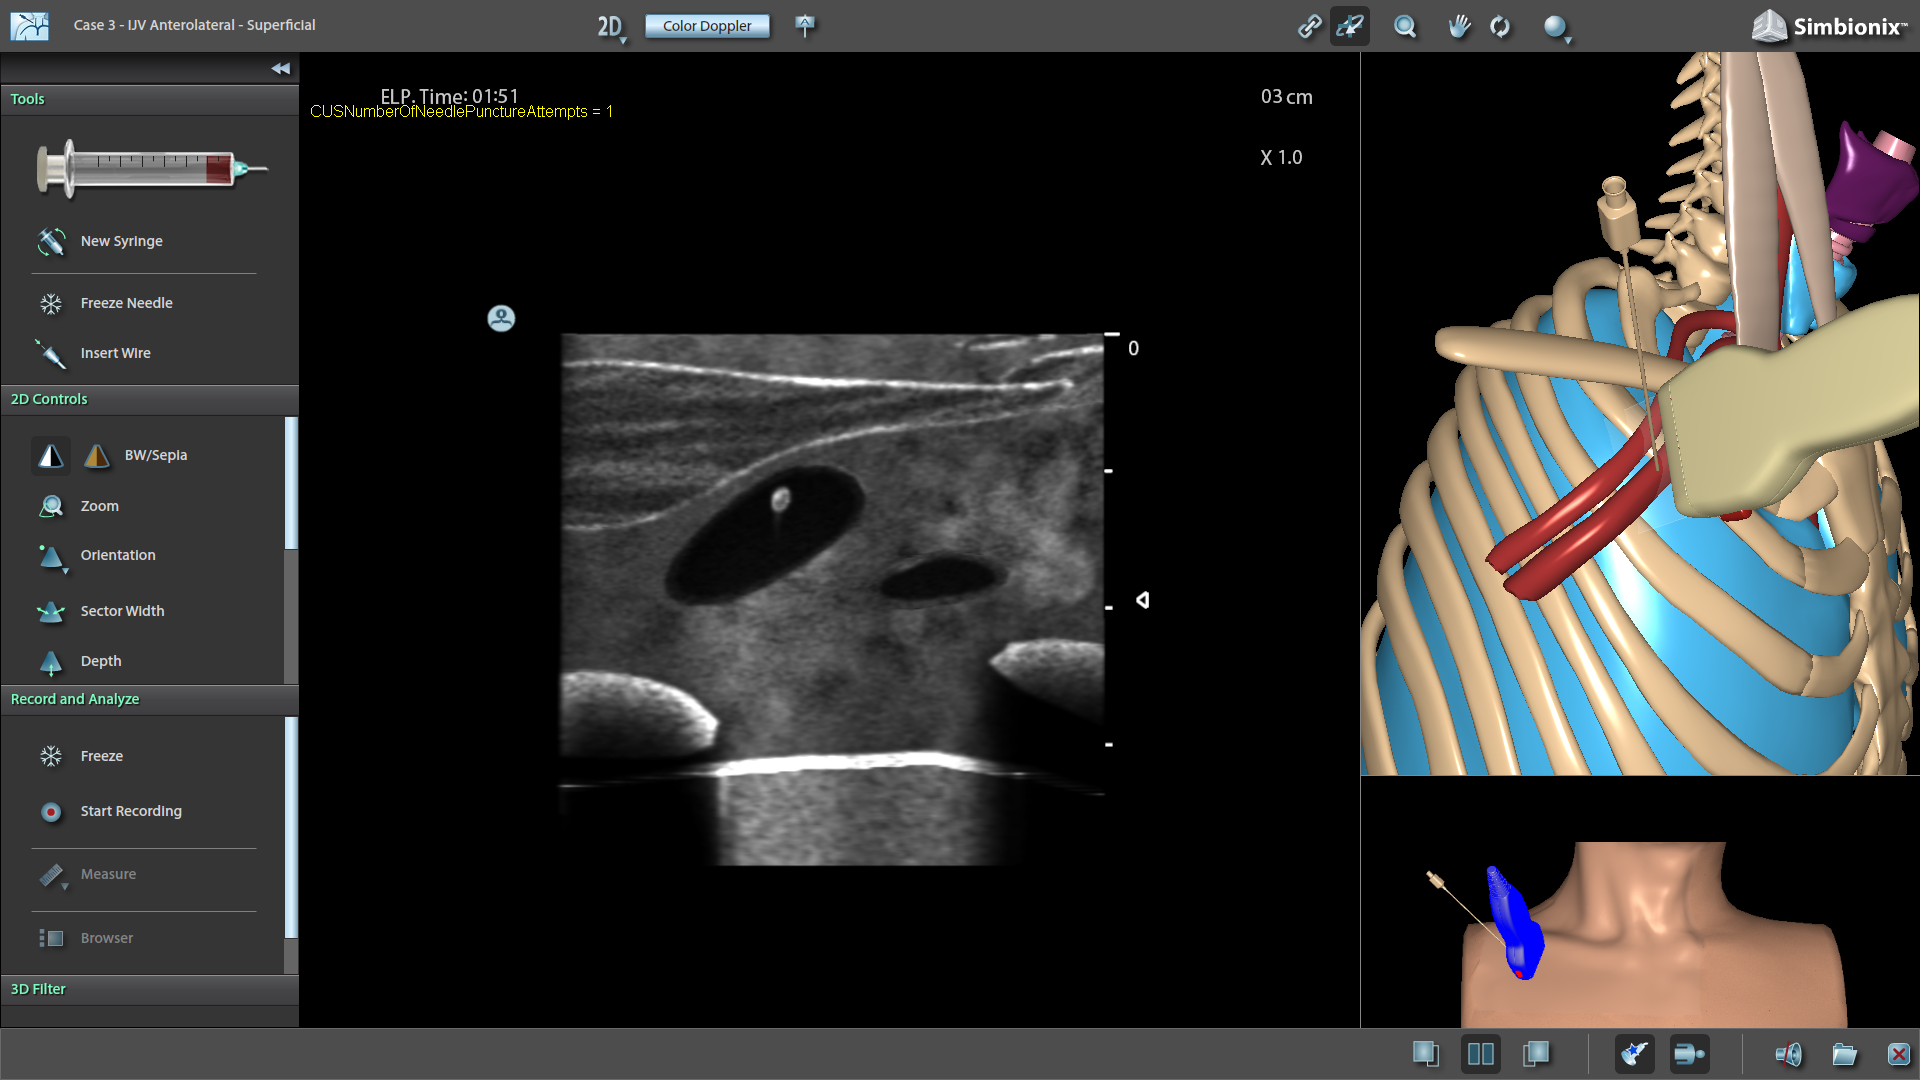 Ultrasound-guided Subclavian Vein Access